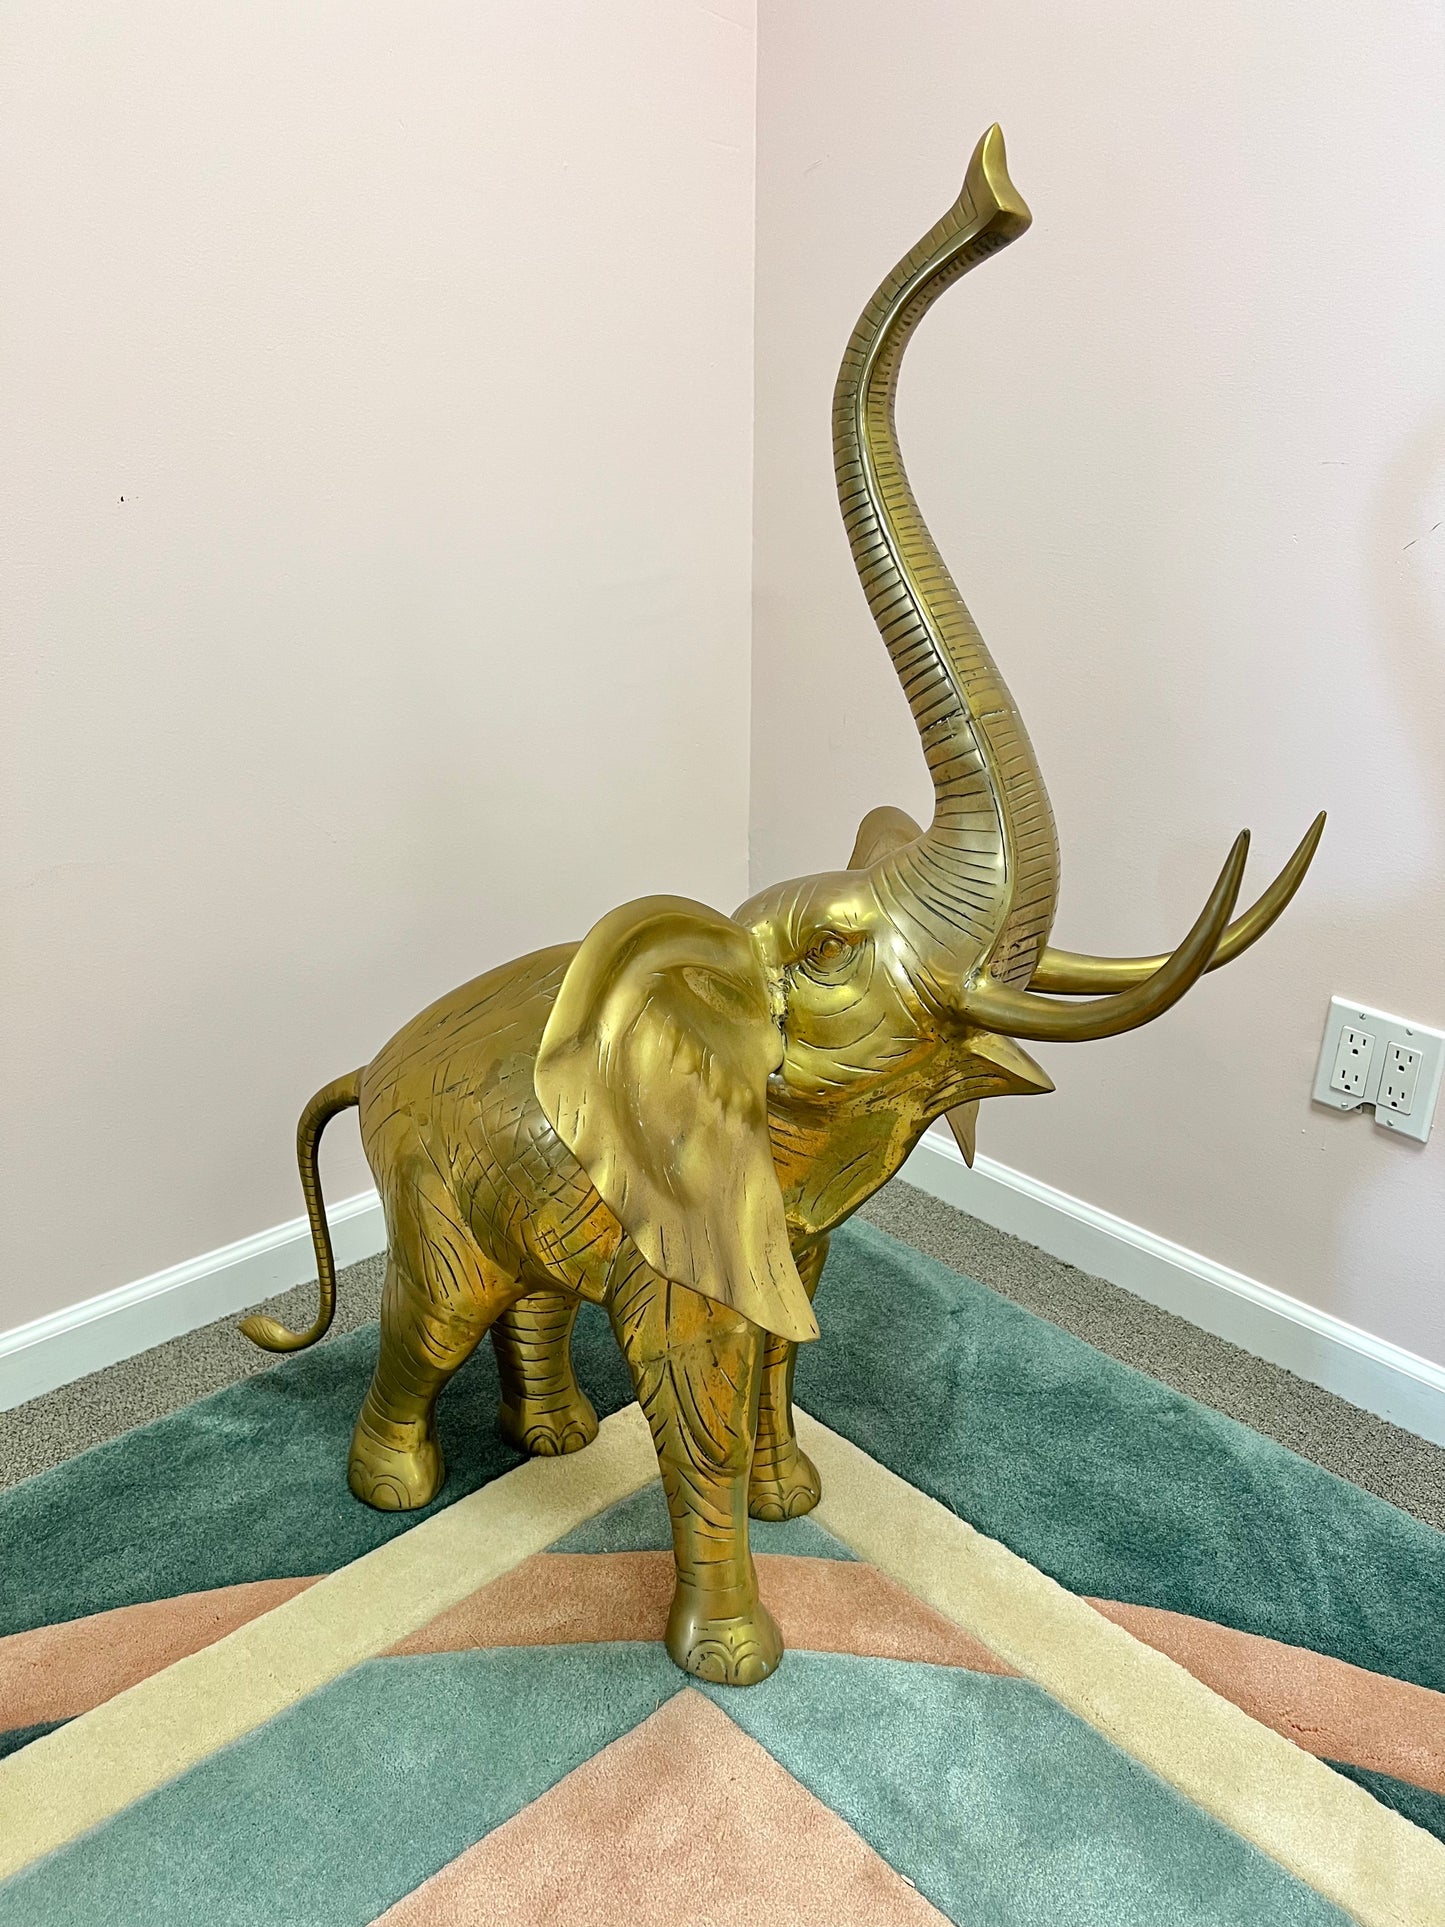 1960’s Extra Large Brass Elephant Statue